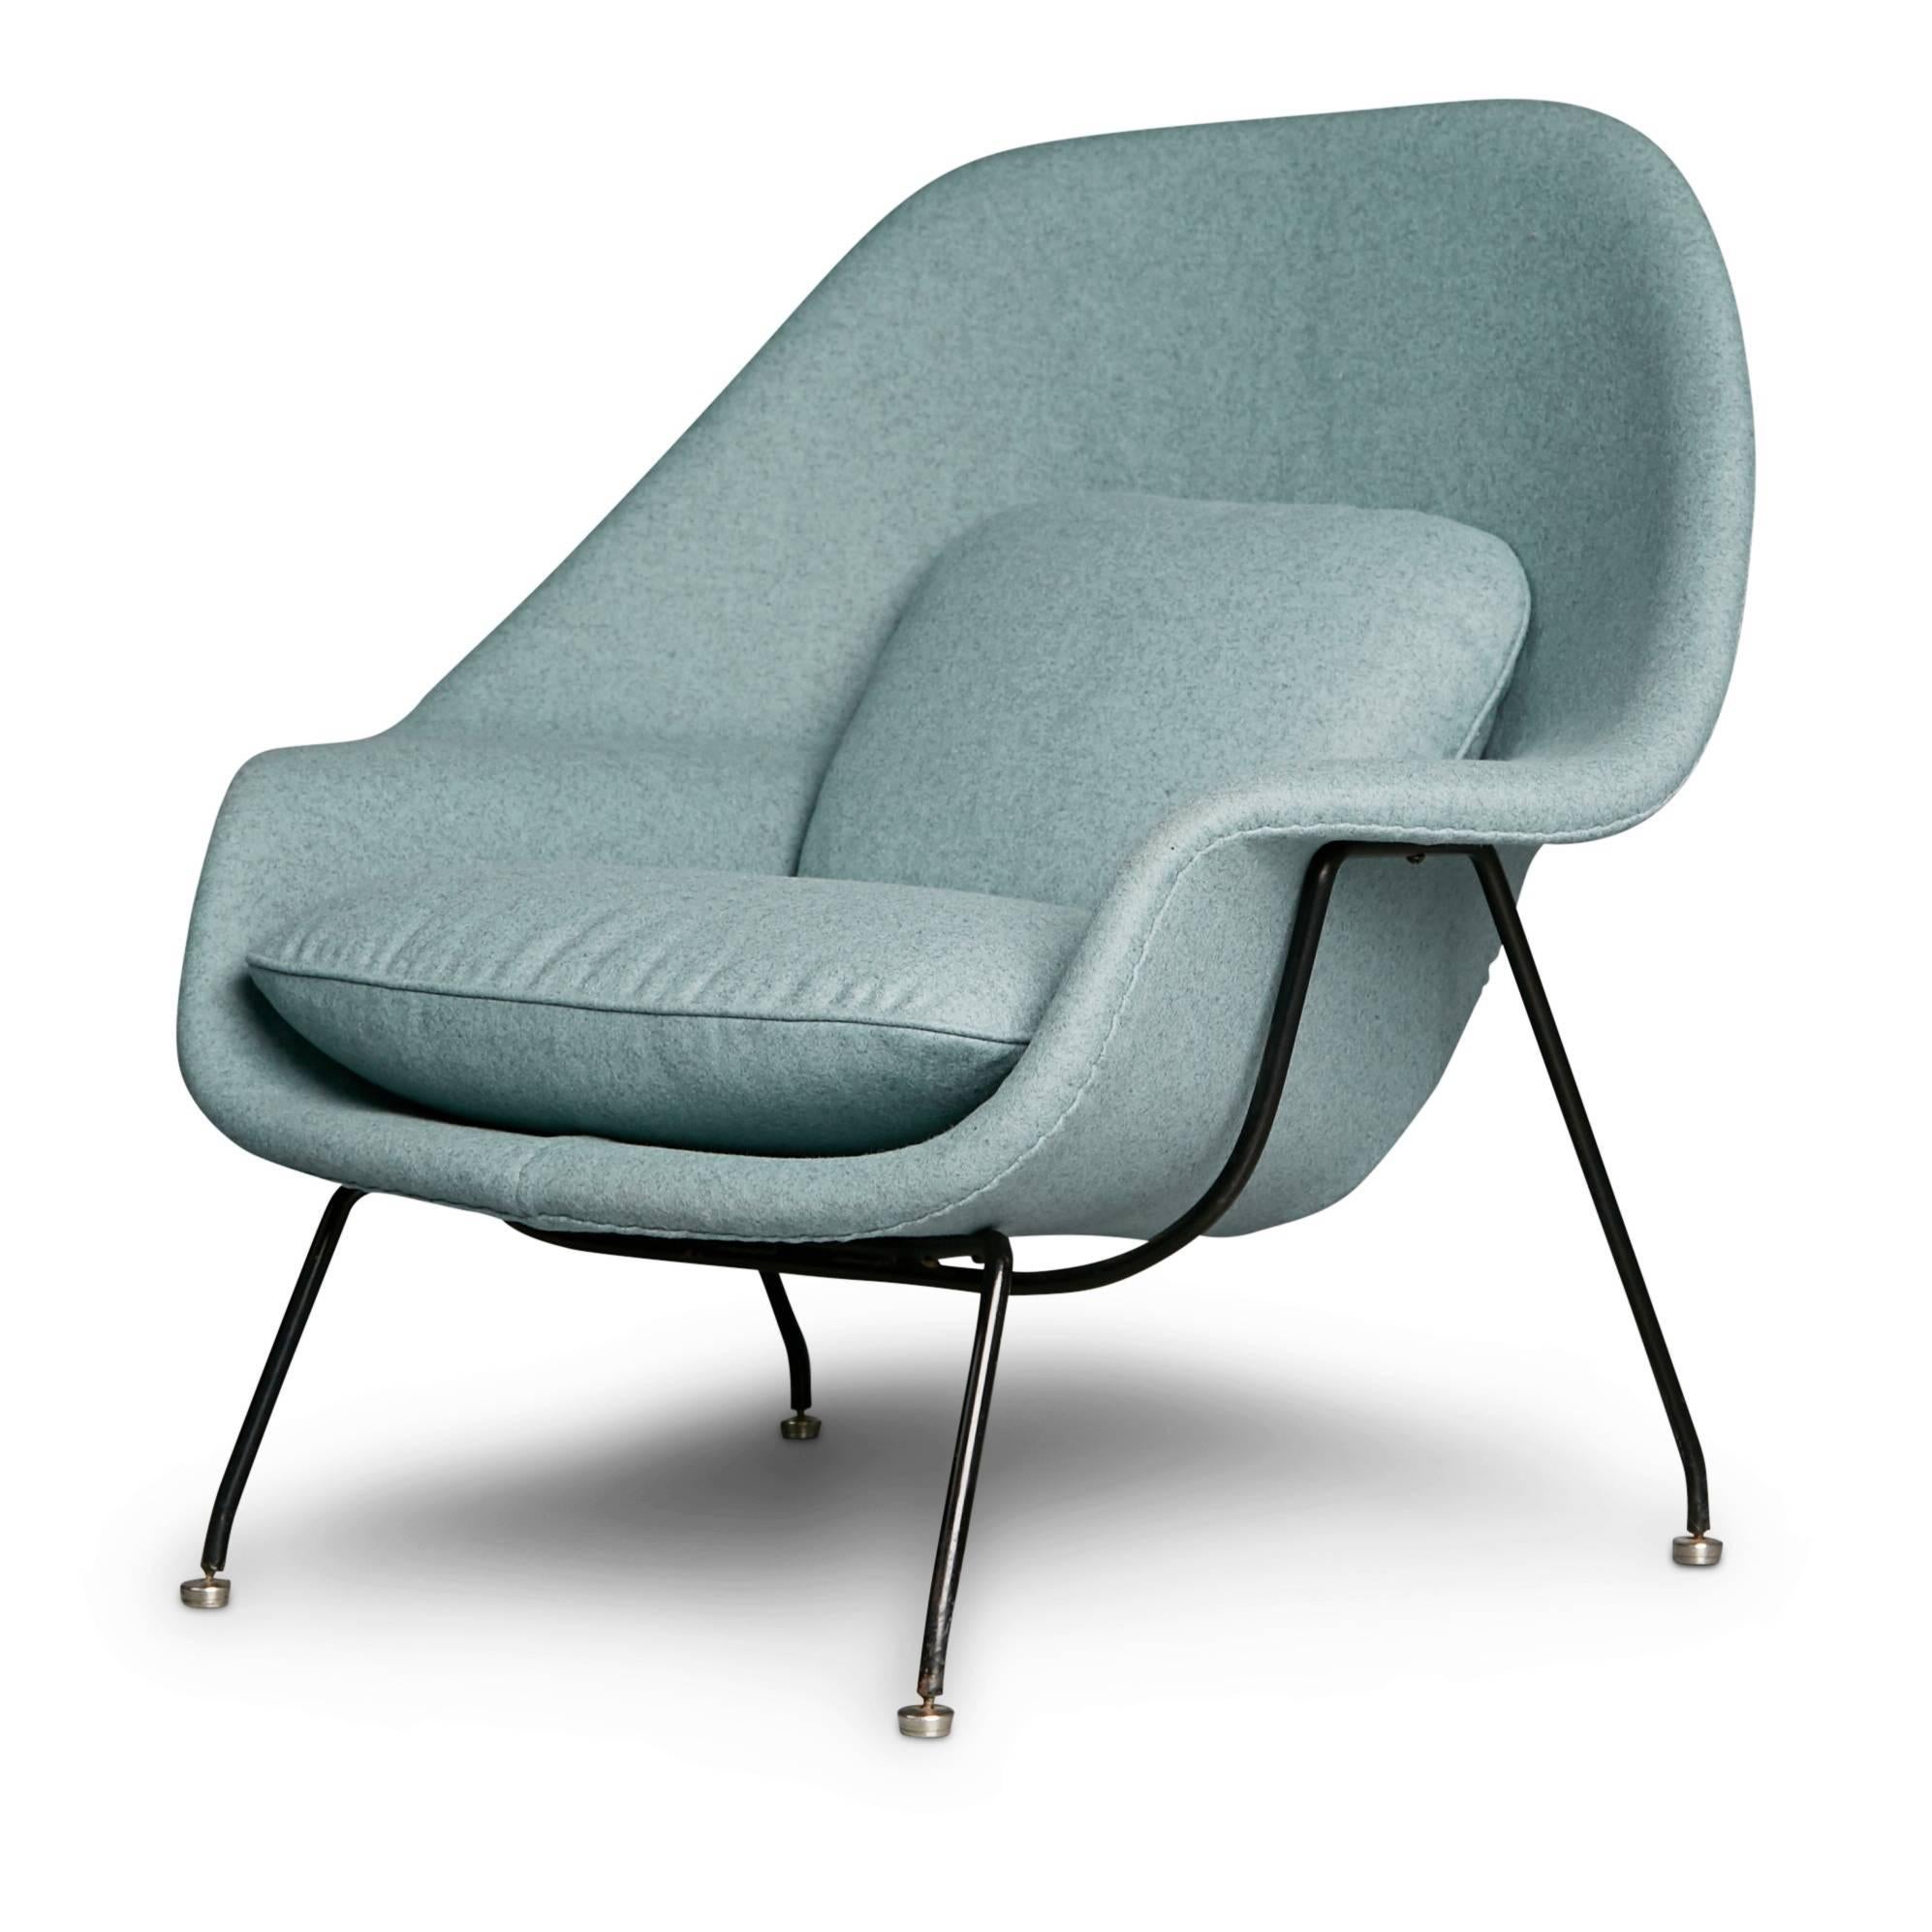 When Florence Knoll requested that Eero Saarinen design a chair like a basket full of pillows, the result was the ground breaking womb armchair. This iconic chair and has been newly upholstered in a beautiful duck egg blue wool with undertones of